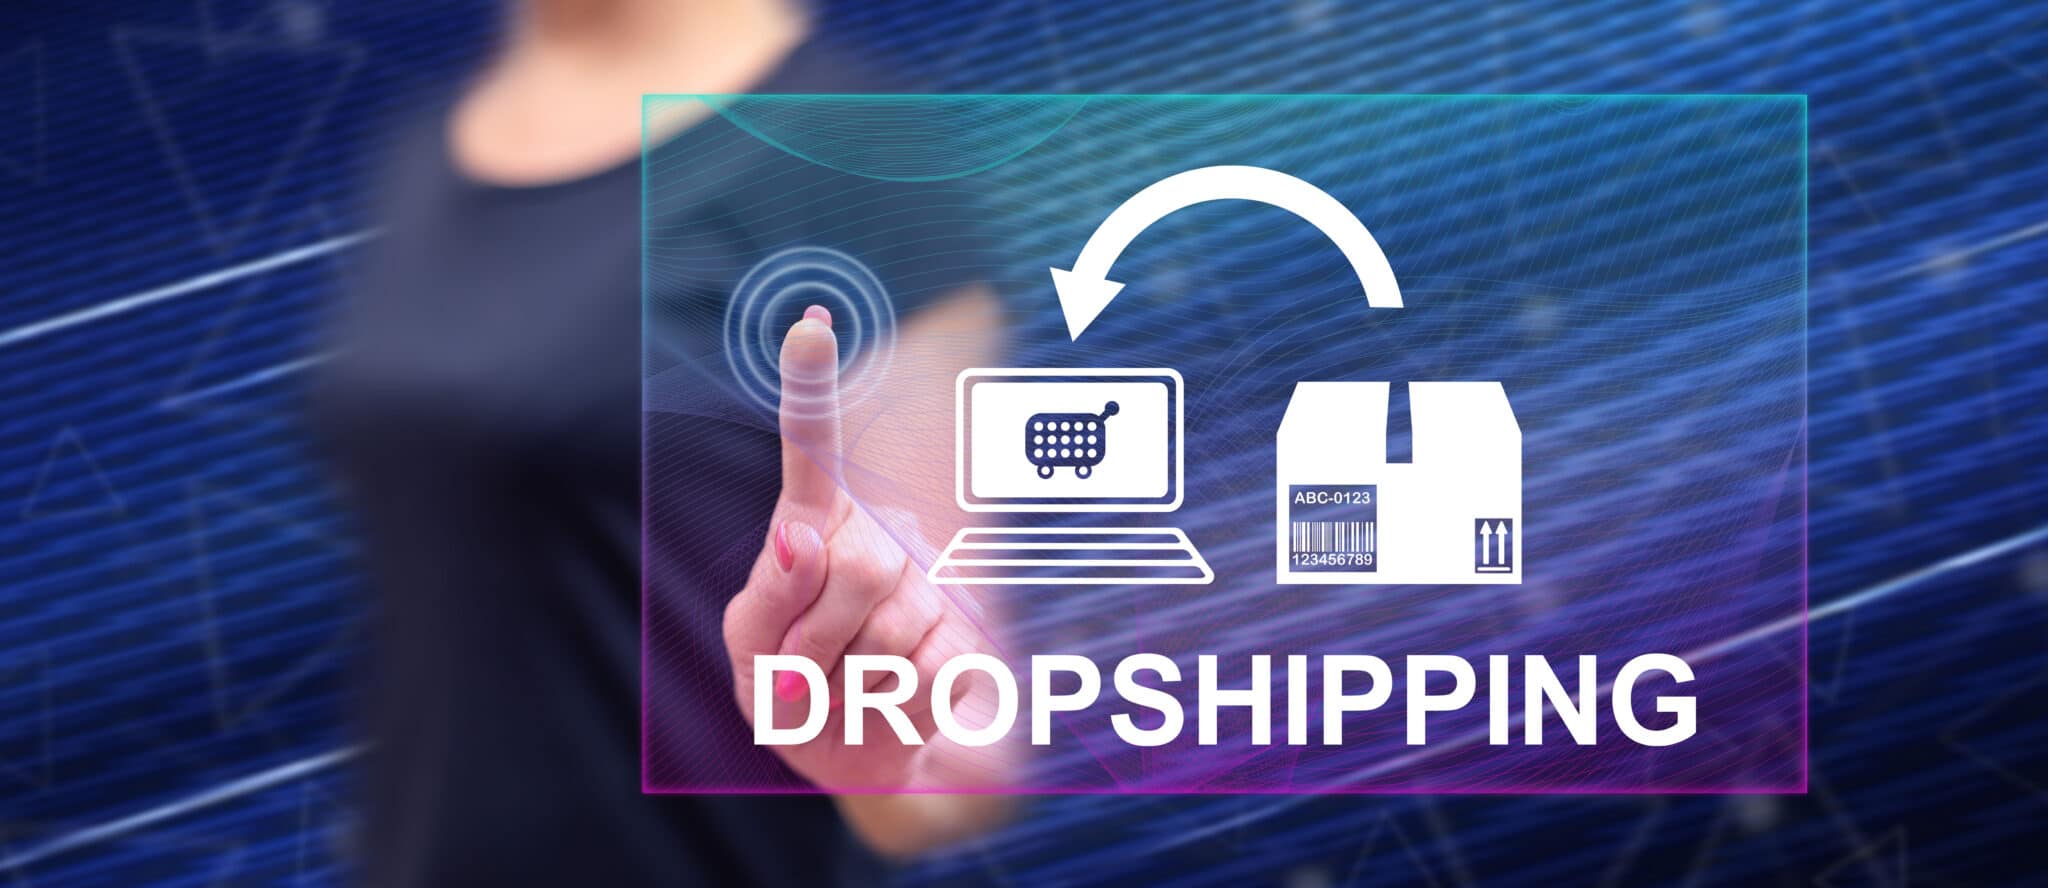 best dropshipping niches